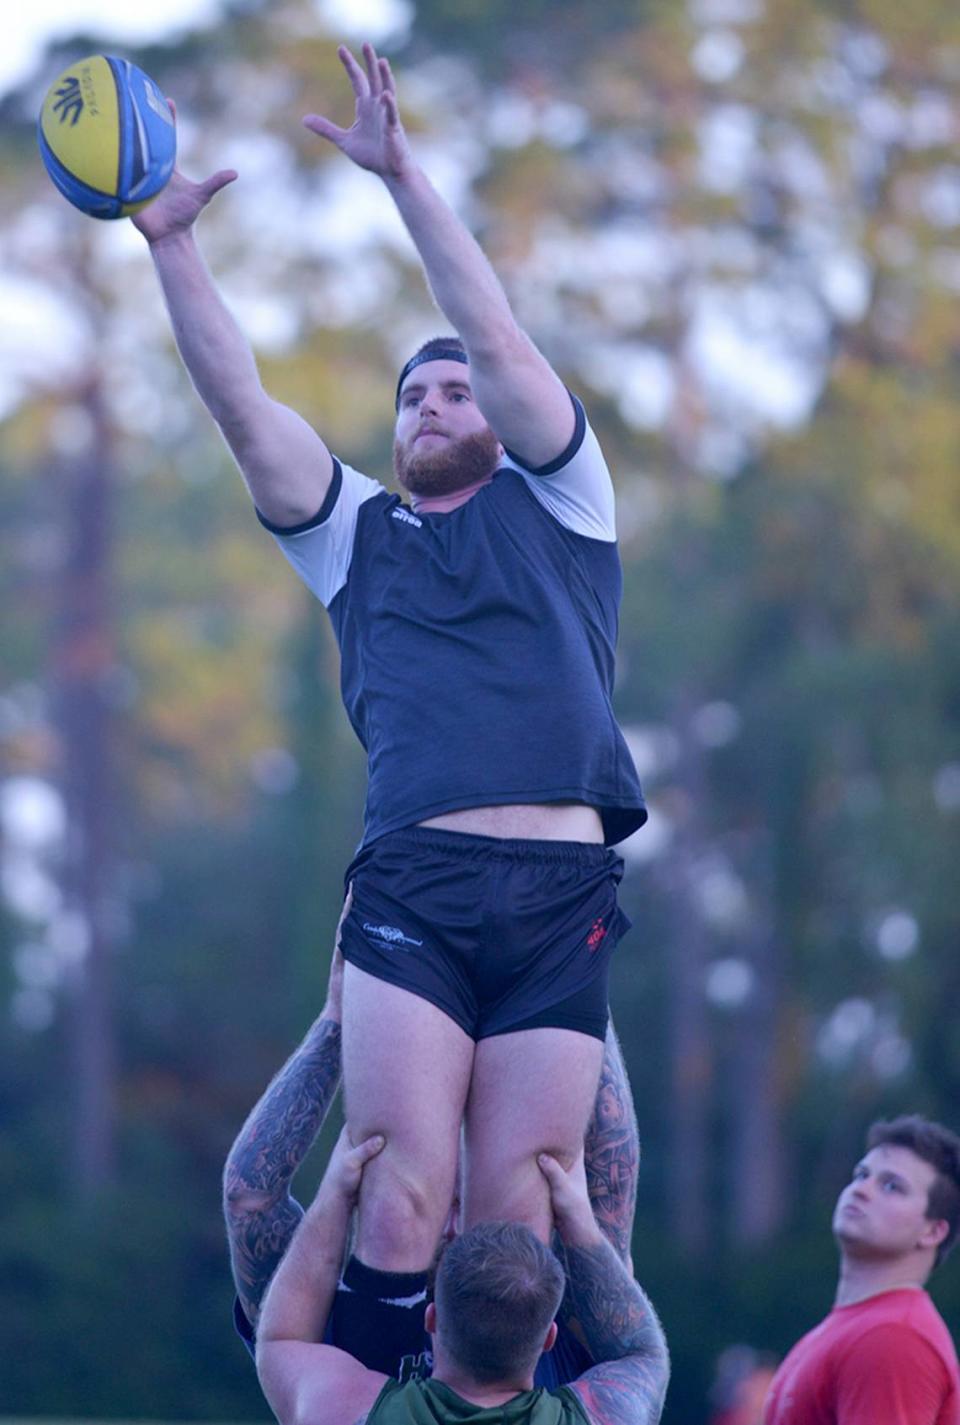 Alex MacDonald puts the work in during the practicing of line-out drill at Hilton Head’s Chaplain Community Park. This was during one of the squads first practices since the team disbanded after the 2017 season.